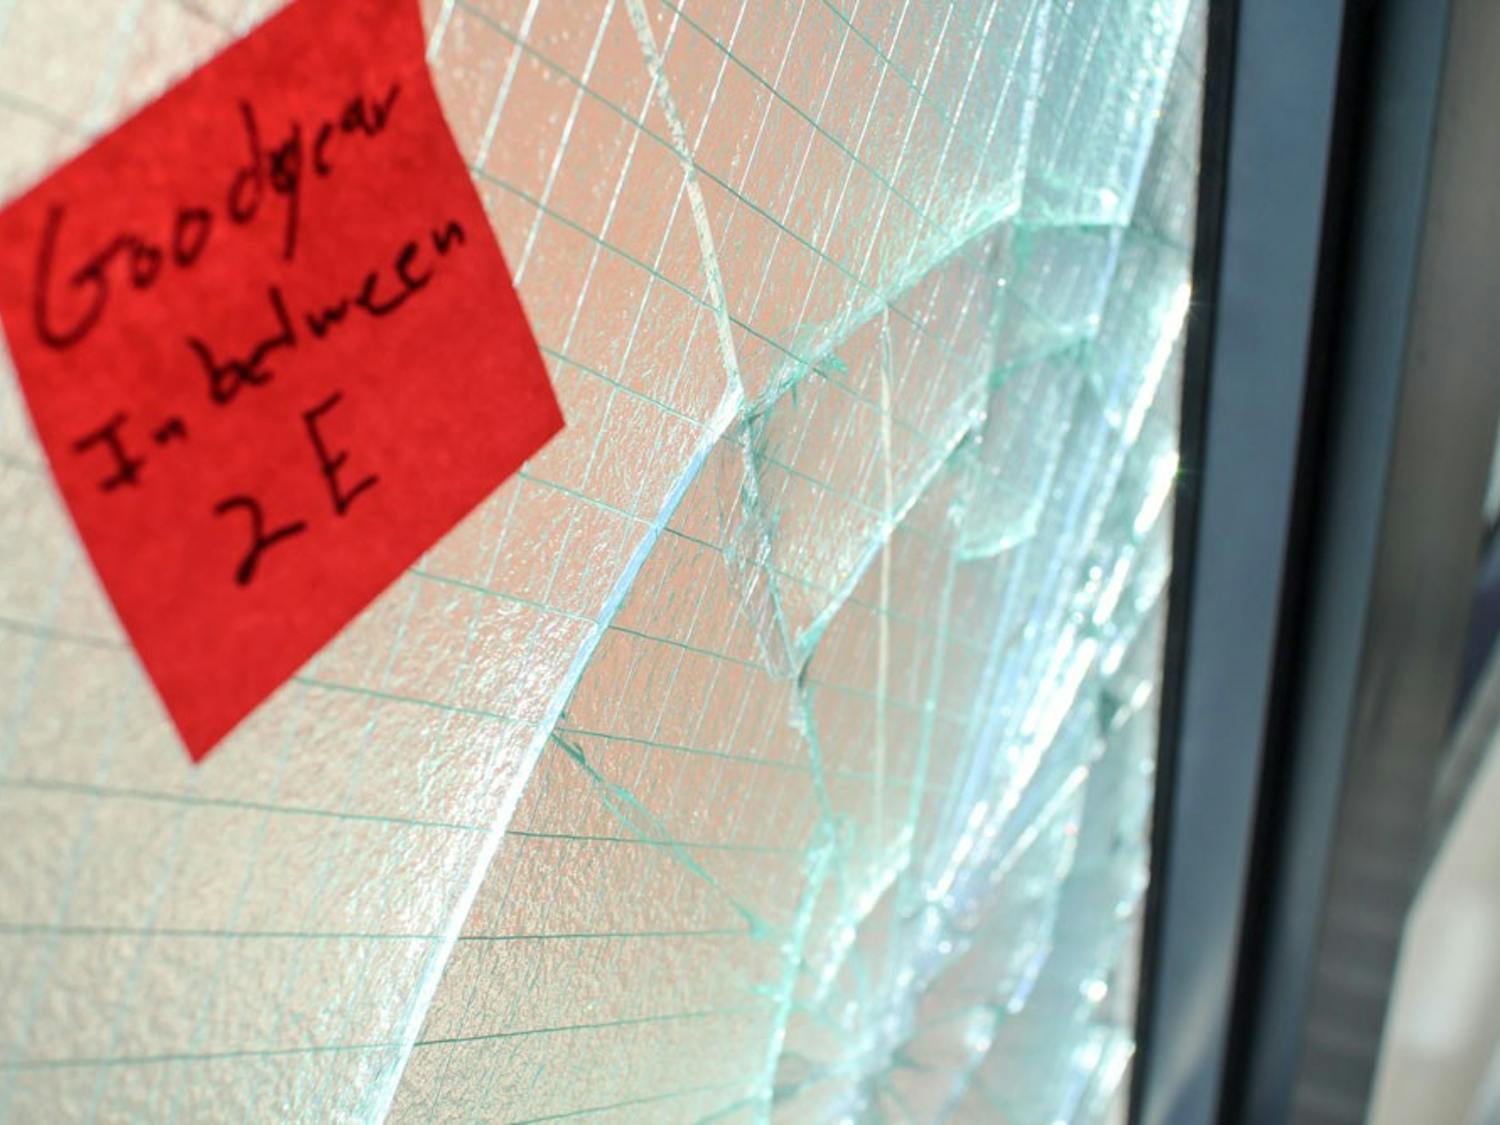 Windows and furniture have been vandalized in Goodyear Hall on UB's South Campus. A&nbsp;monetary amount is likely to be charged to each Goodyear Hall resident’s bill if no students come forward.